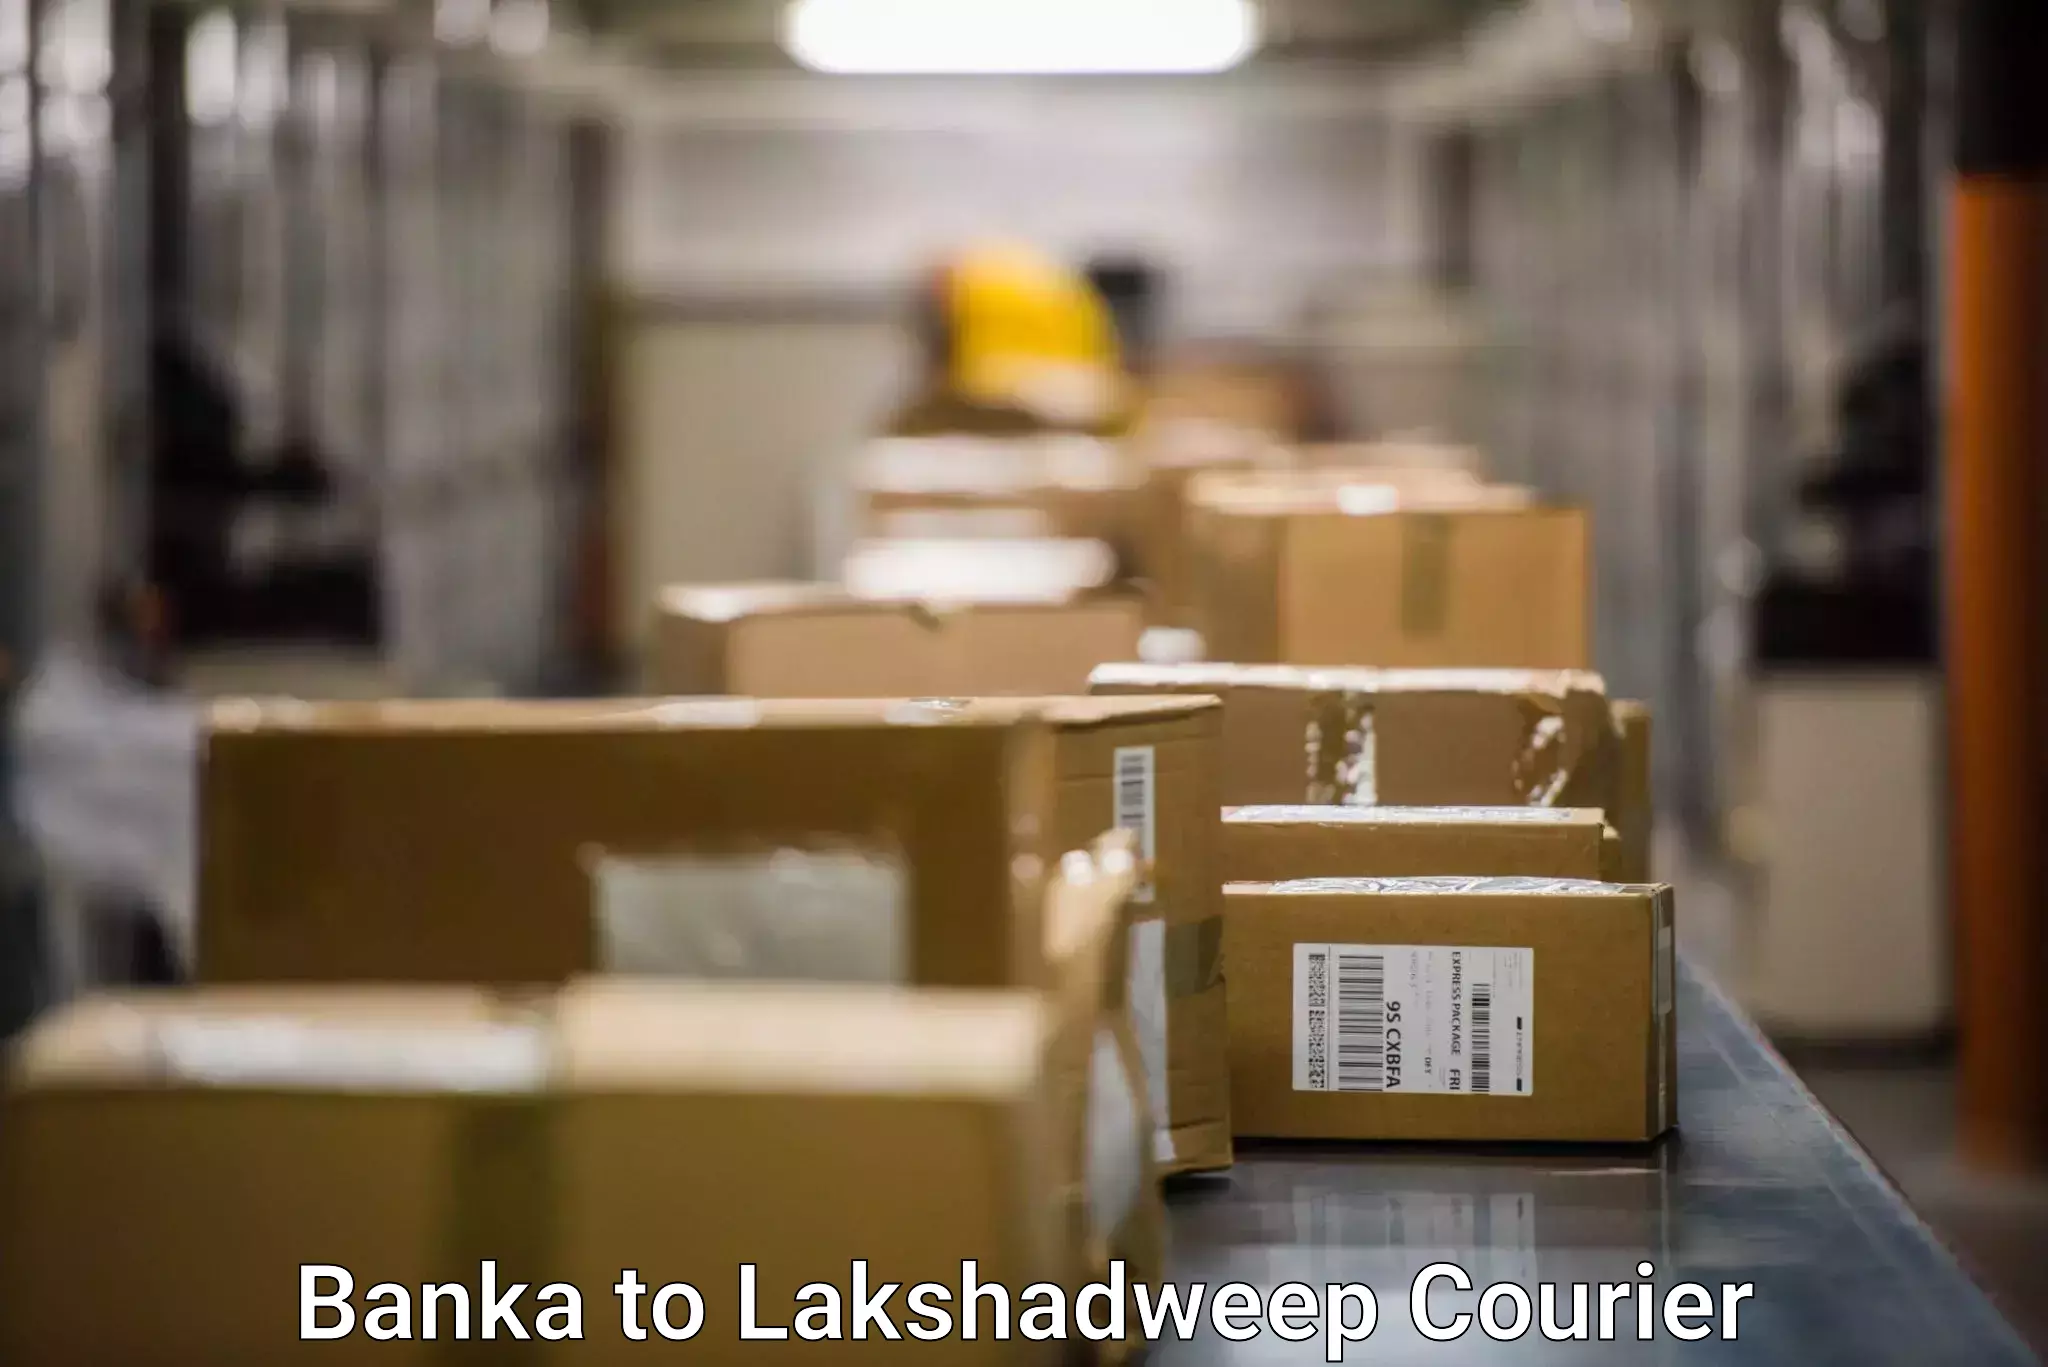 Medical delivery services Banka to Lakshadweep